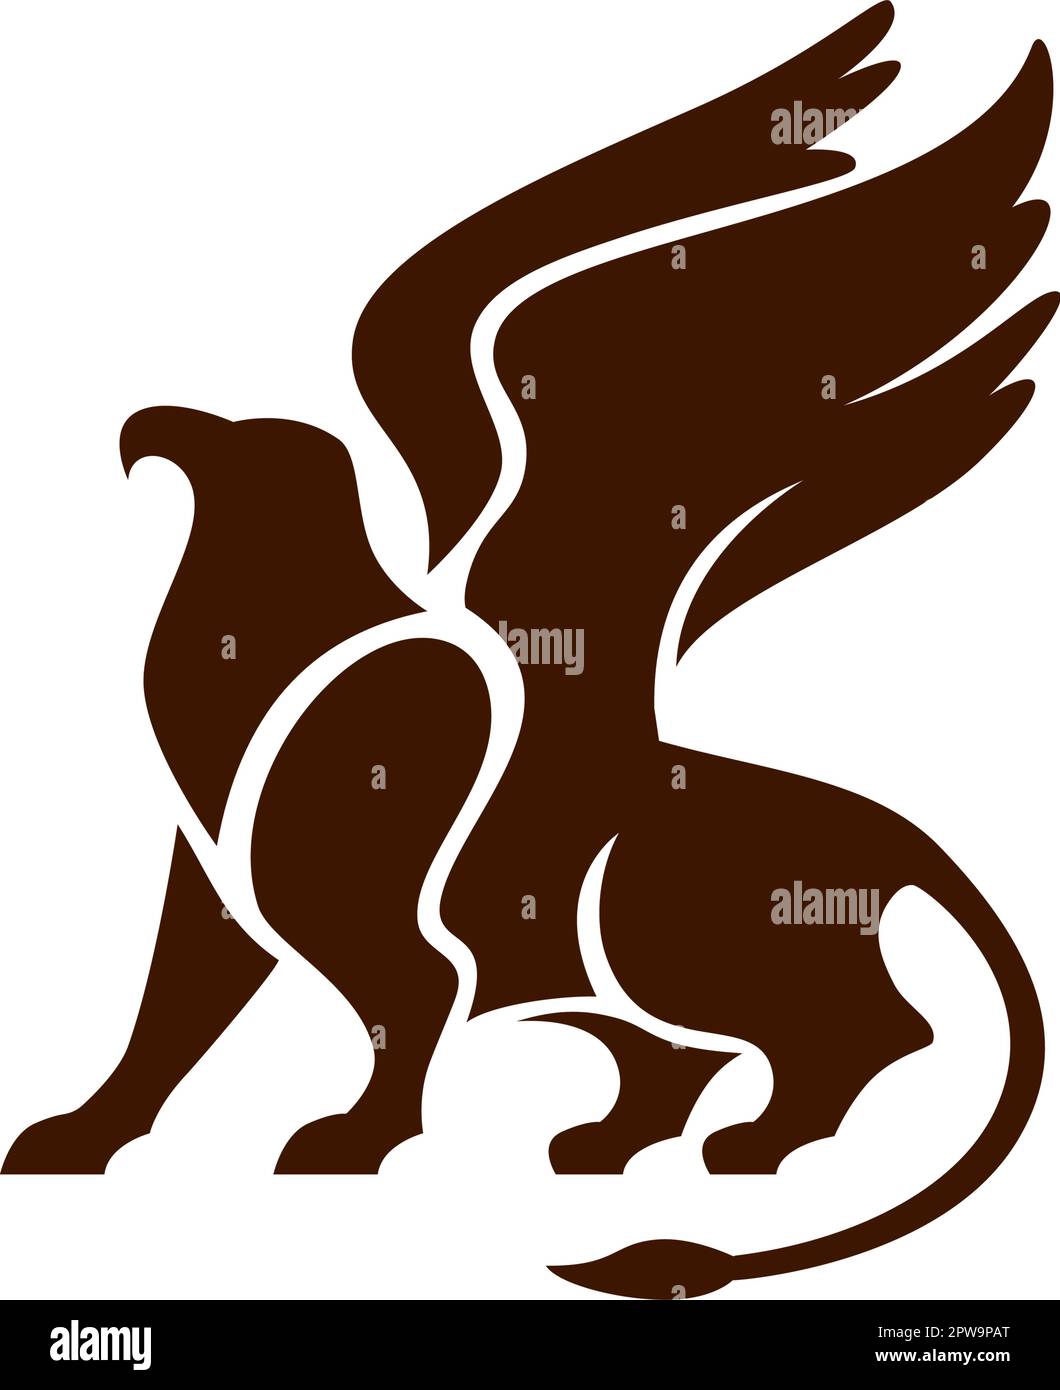 Griffin Mythology Creature Illustration with Silhouette Style Stock Vector